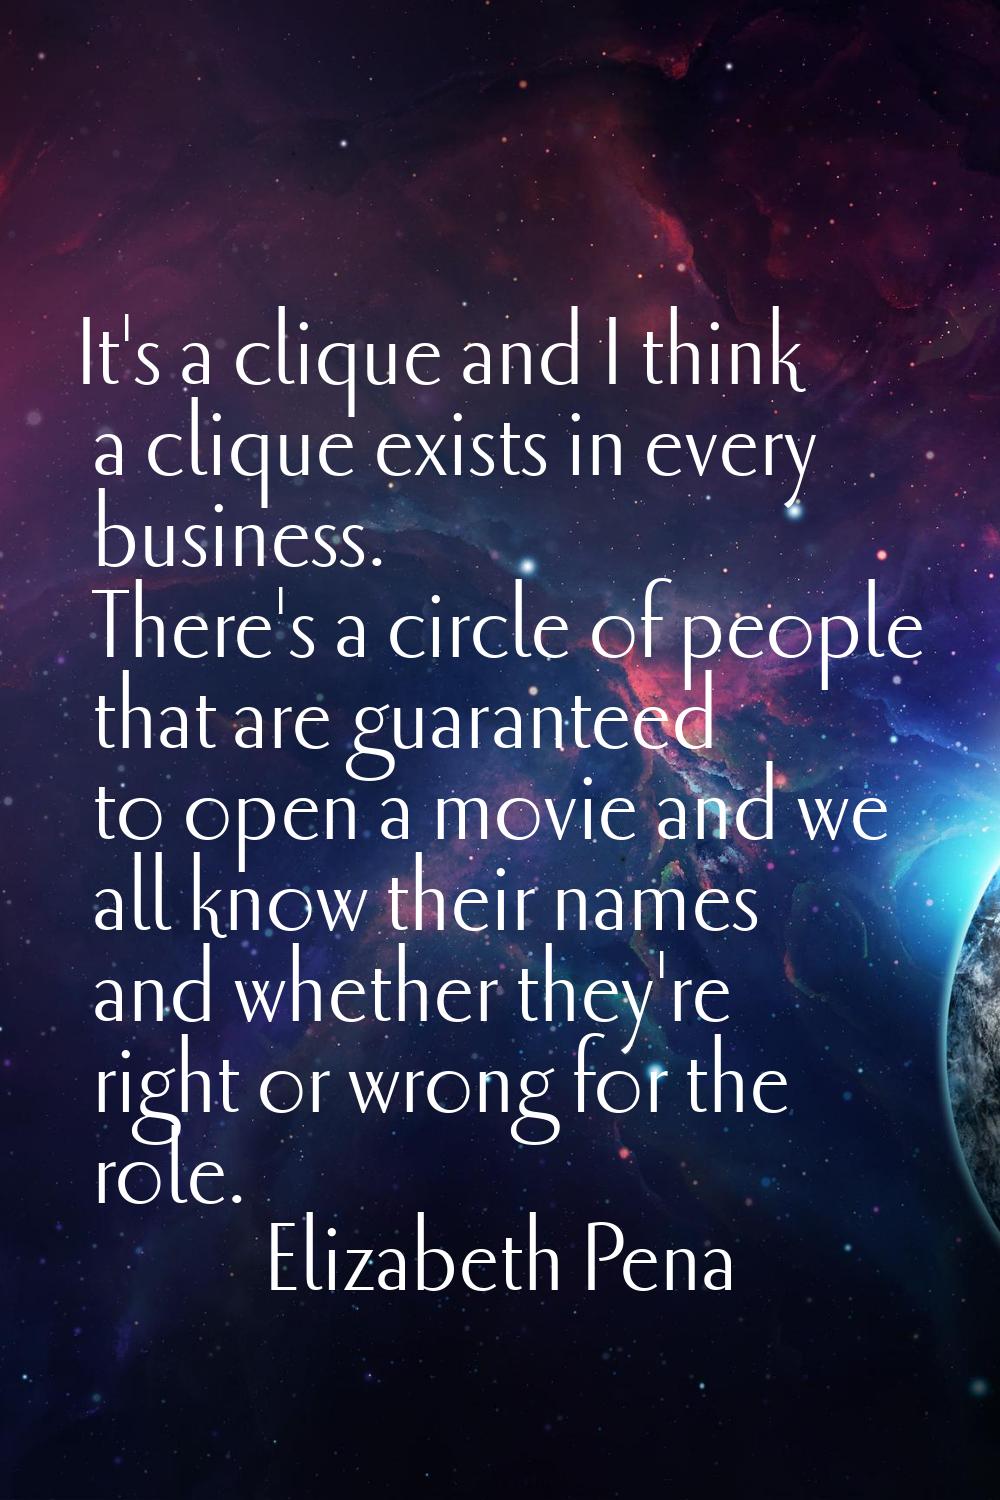 It's a clique and I think a clique exists in every business. There's a circle of people that are gu